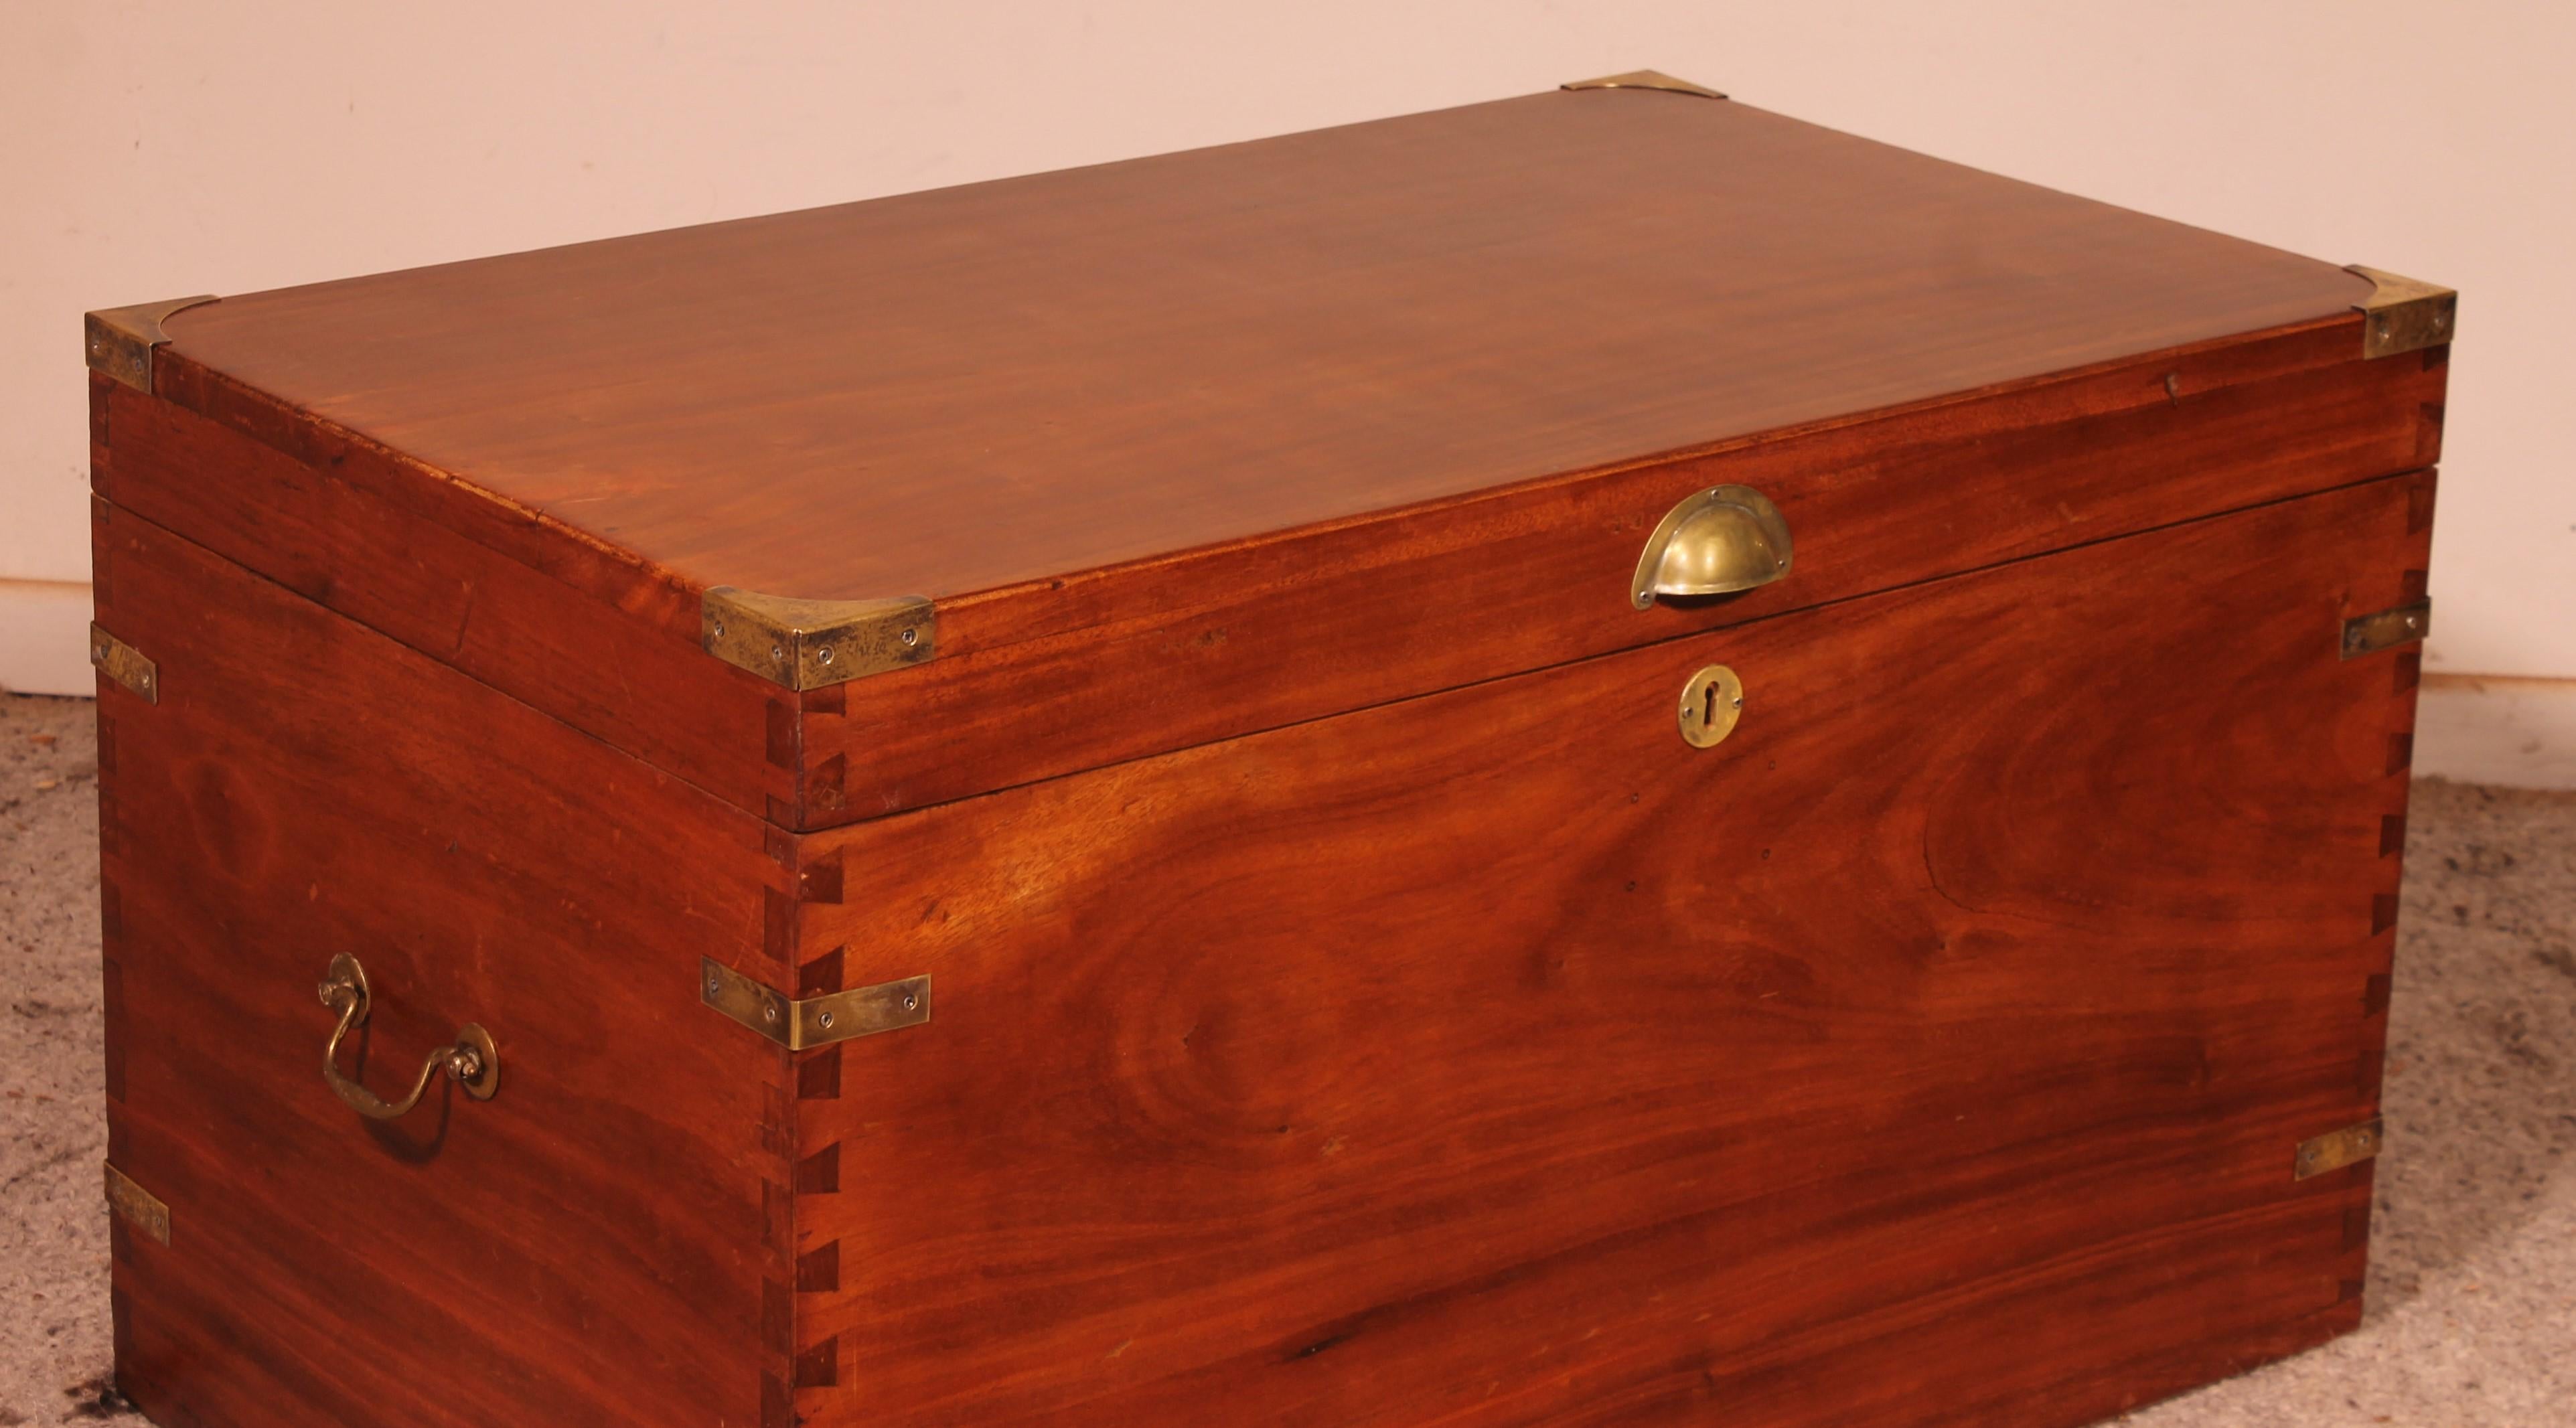 Early 20th Century Campaign Chest or Marine Chest in Camphor Wood circa 1900, England